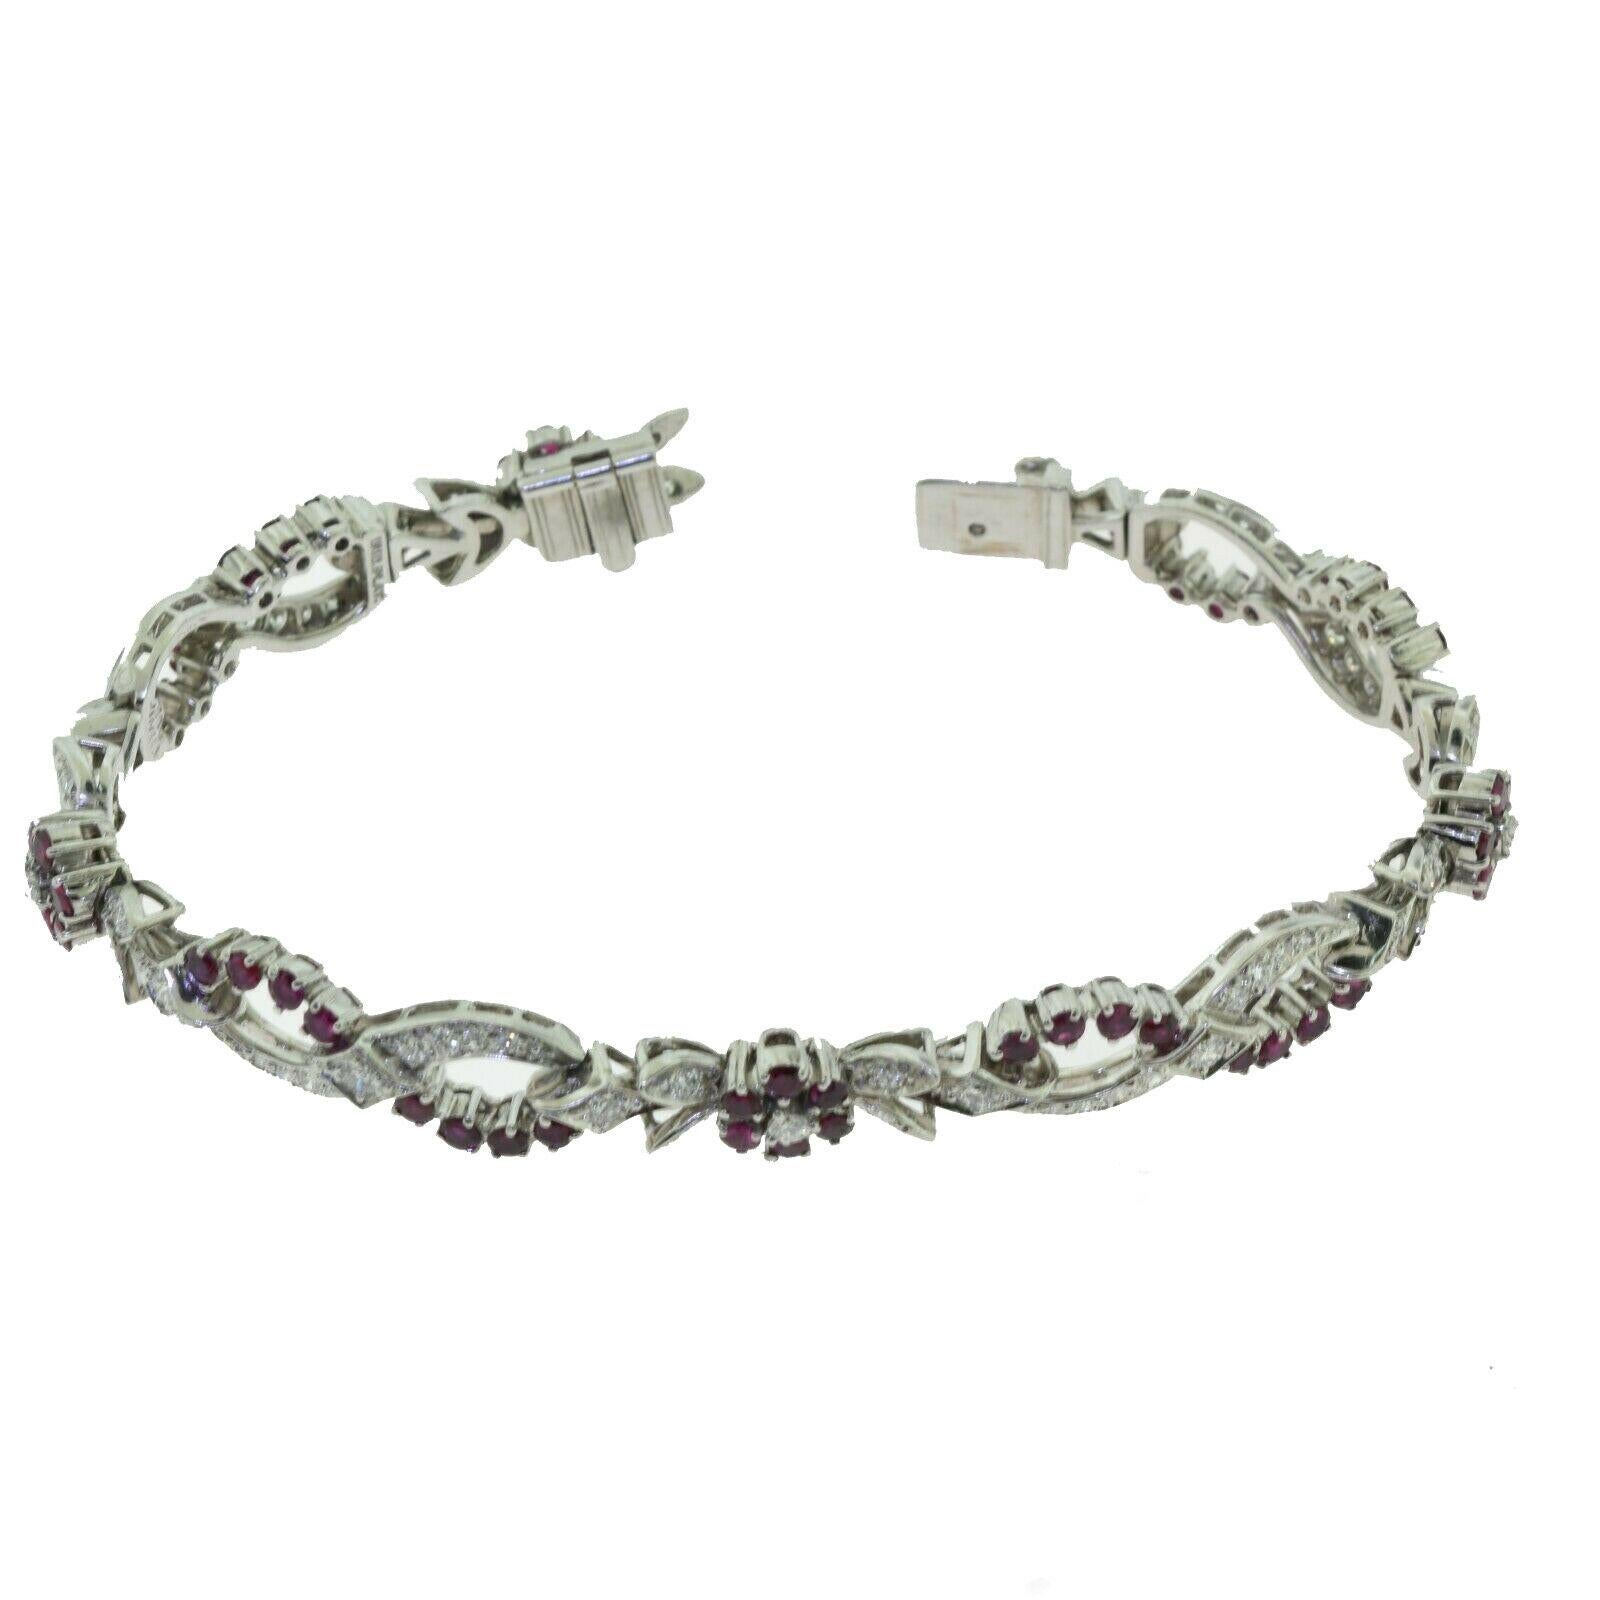 Women's or Men's 1940 Tiffany & Co. Diamond and Ruby Floral Bracelet in Platinum, Vintage